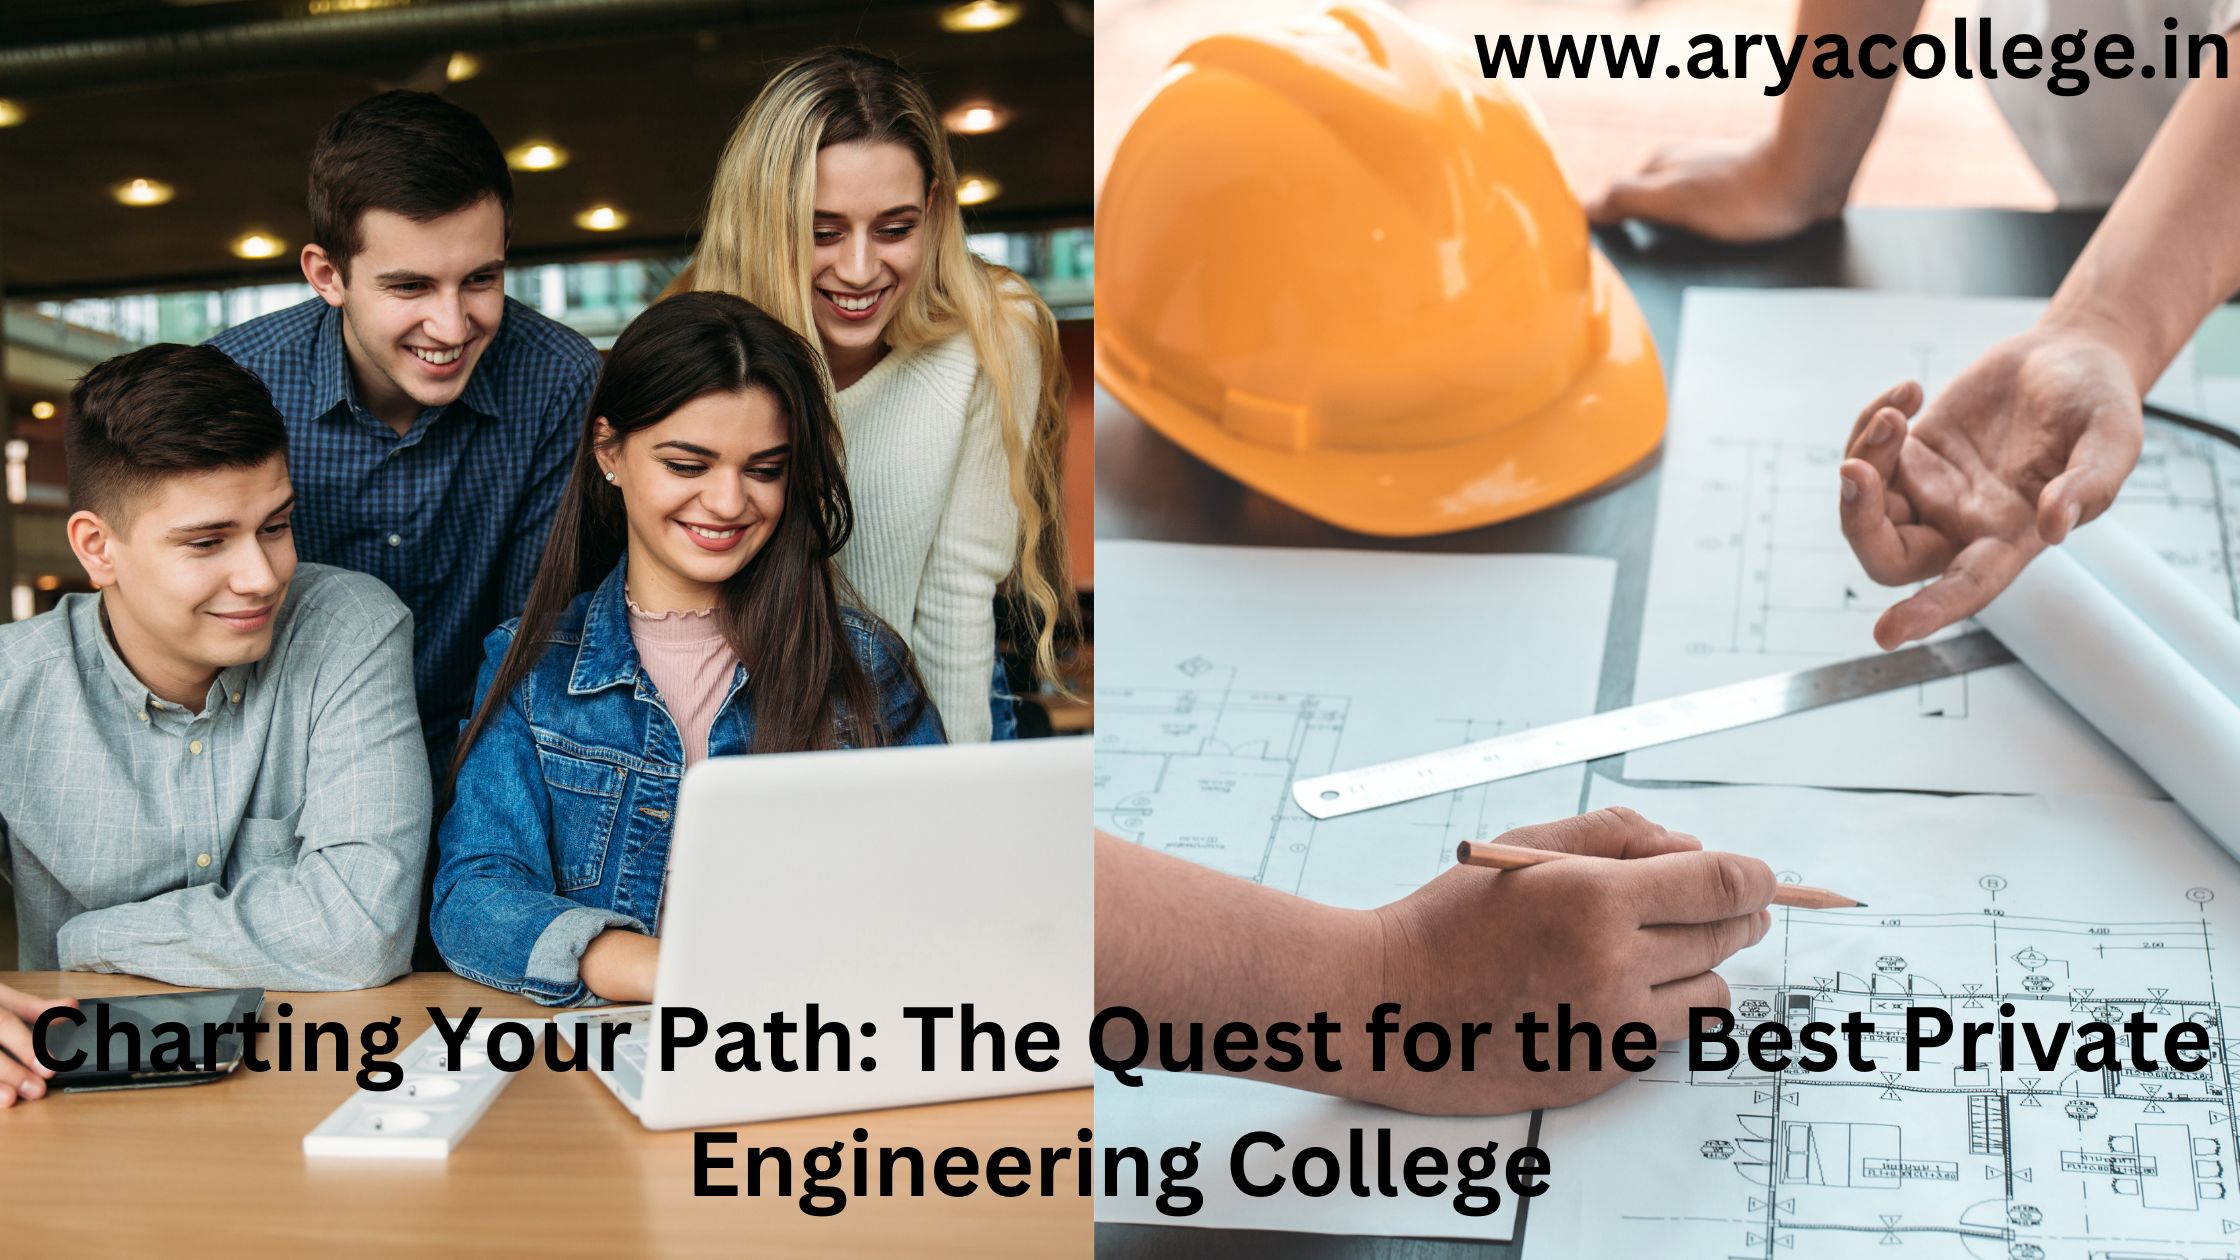 Charting Your Path: The Quest for the Best Private Engineering College